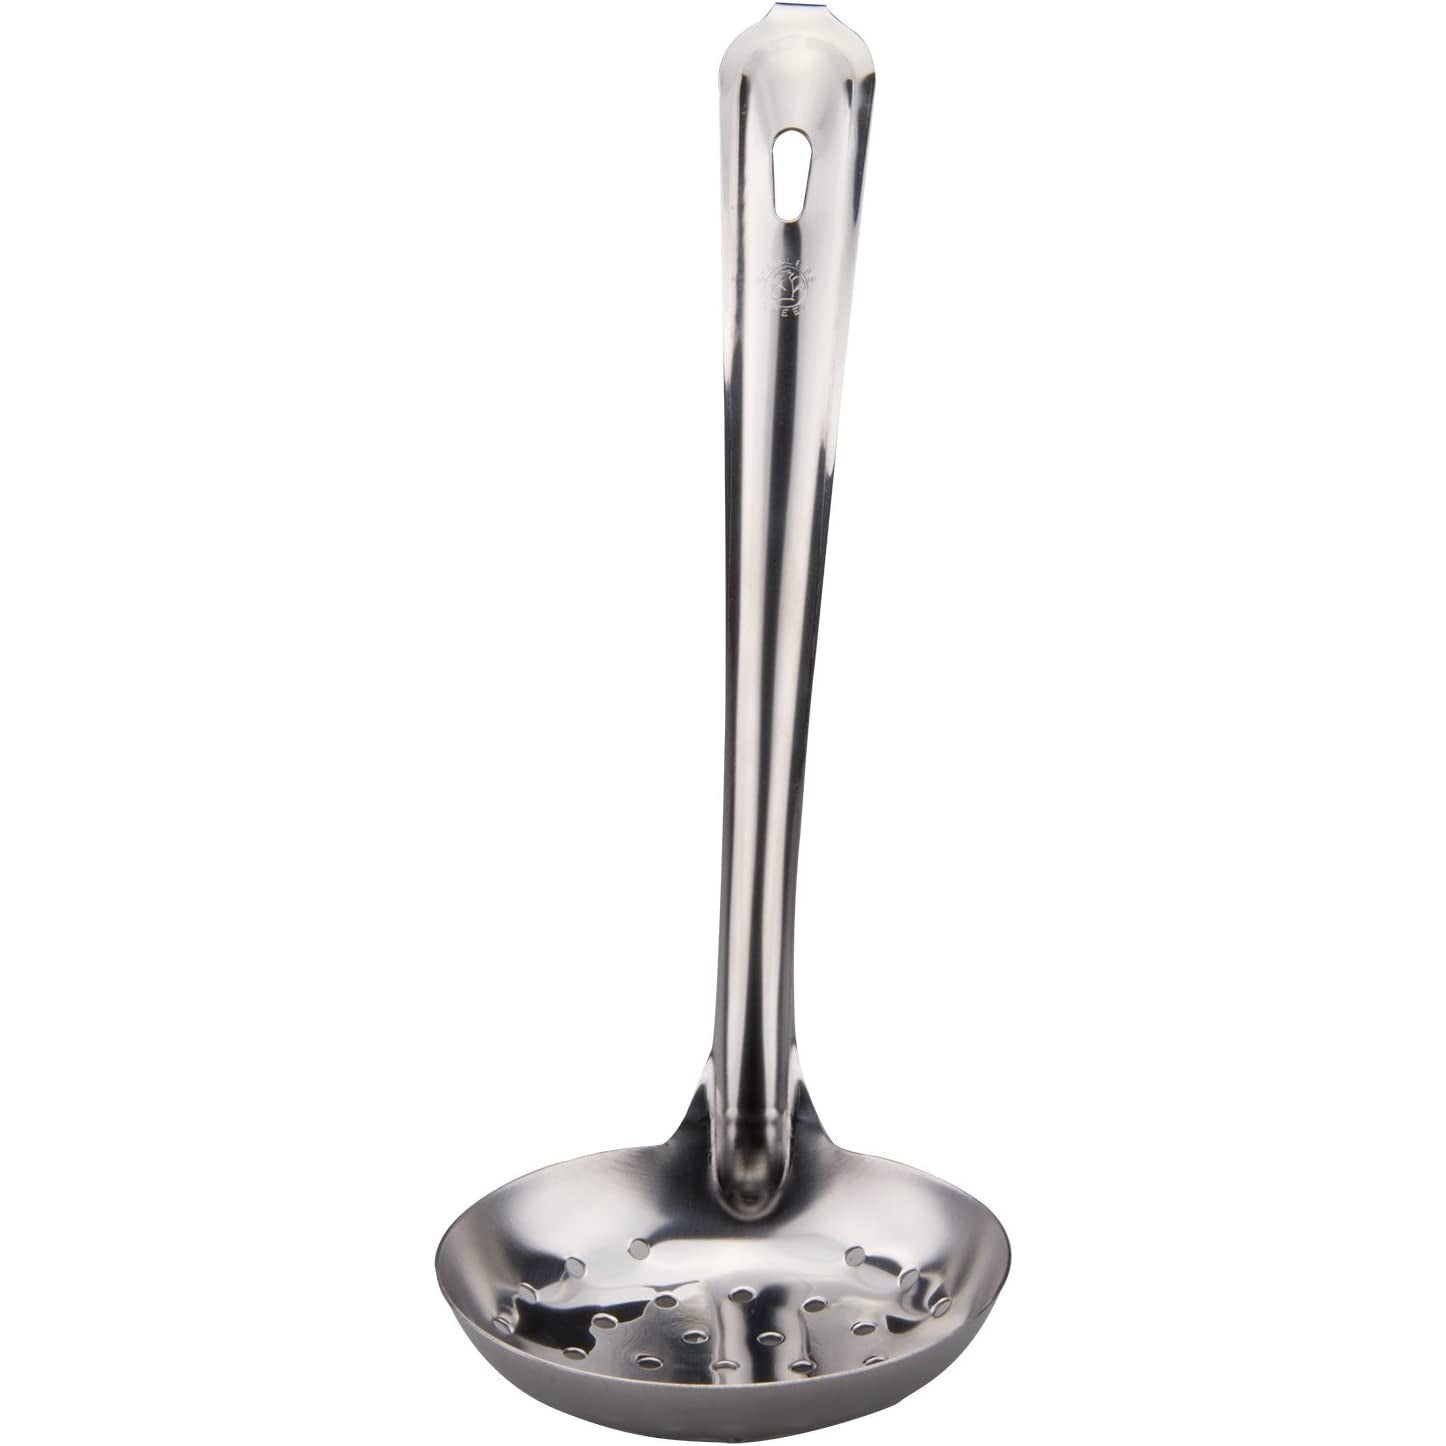 Stainless Steel Metal Soup Ladle with Straining Holes (3 Sizes)